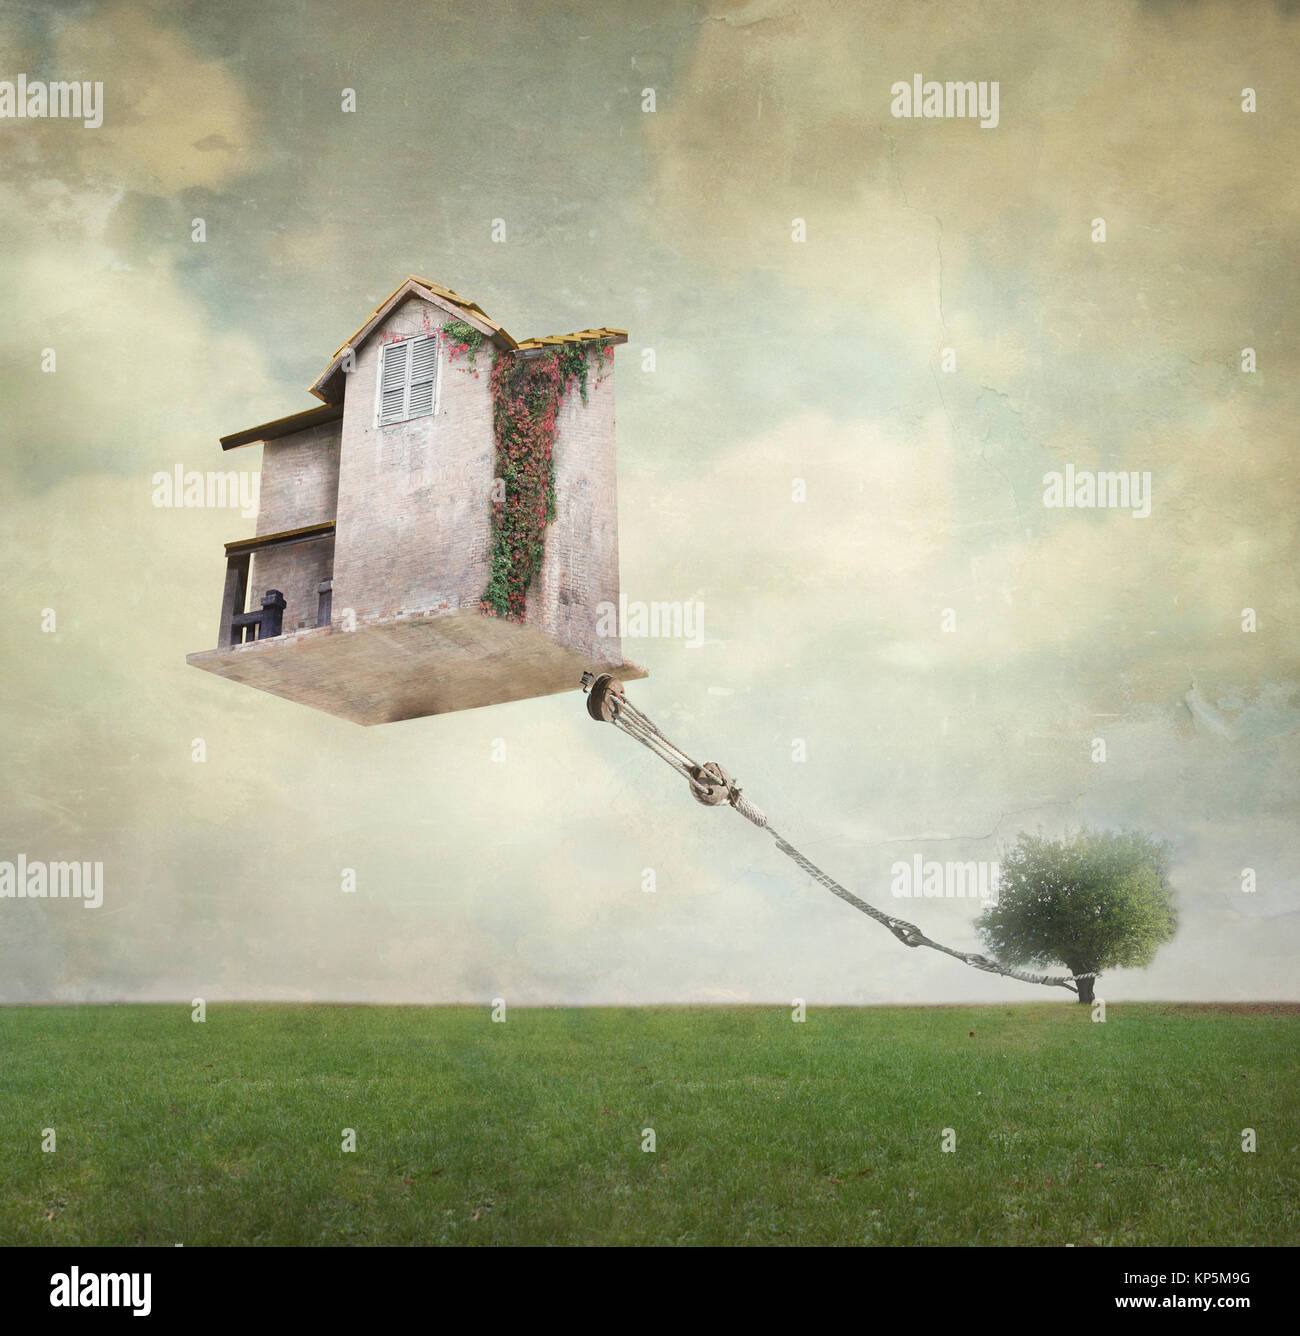 Artistic image representing an house floating in the air tied to a rope to the tree in a surreal vintage background Stock Photo